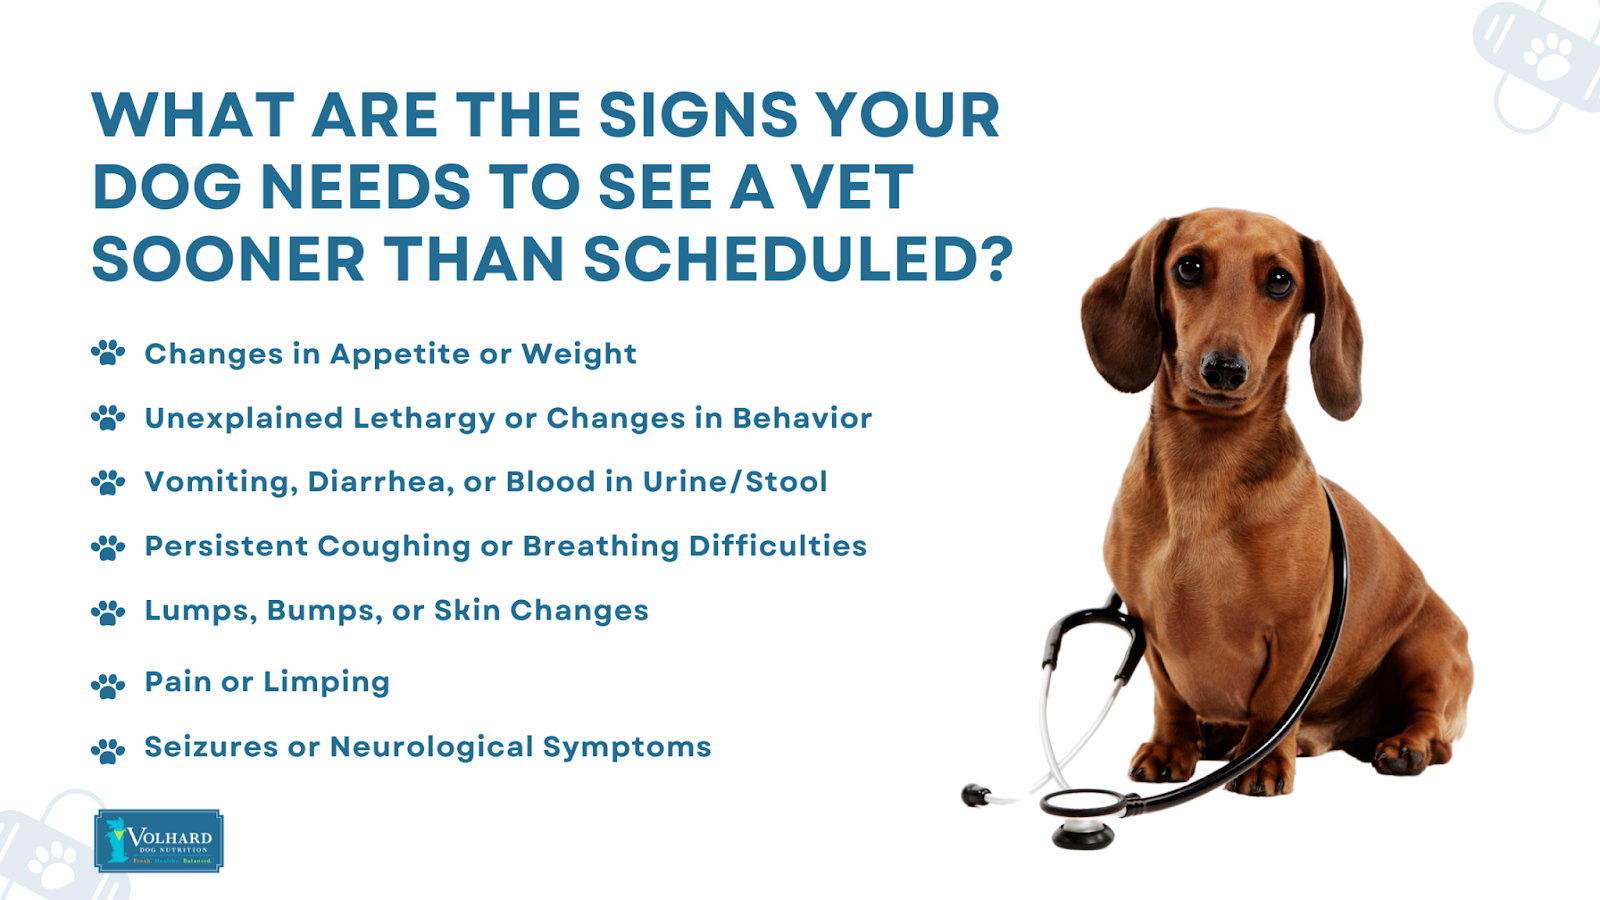 Signs dog needs see vet